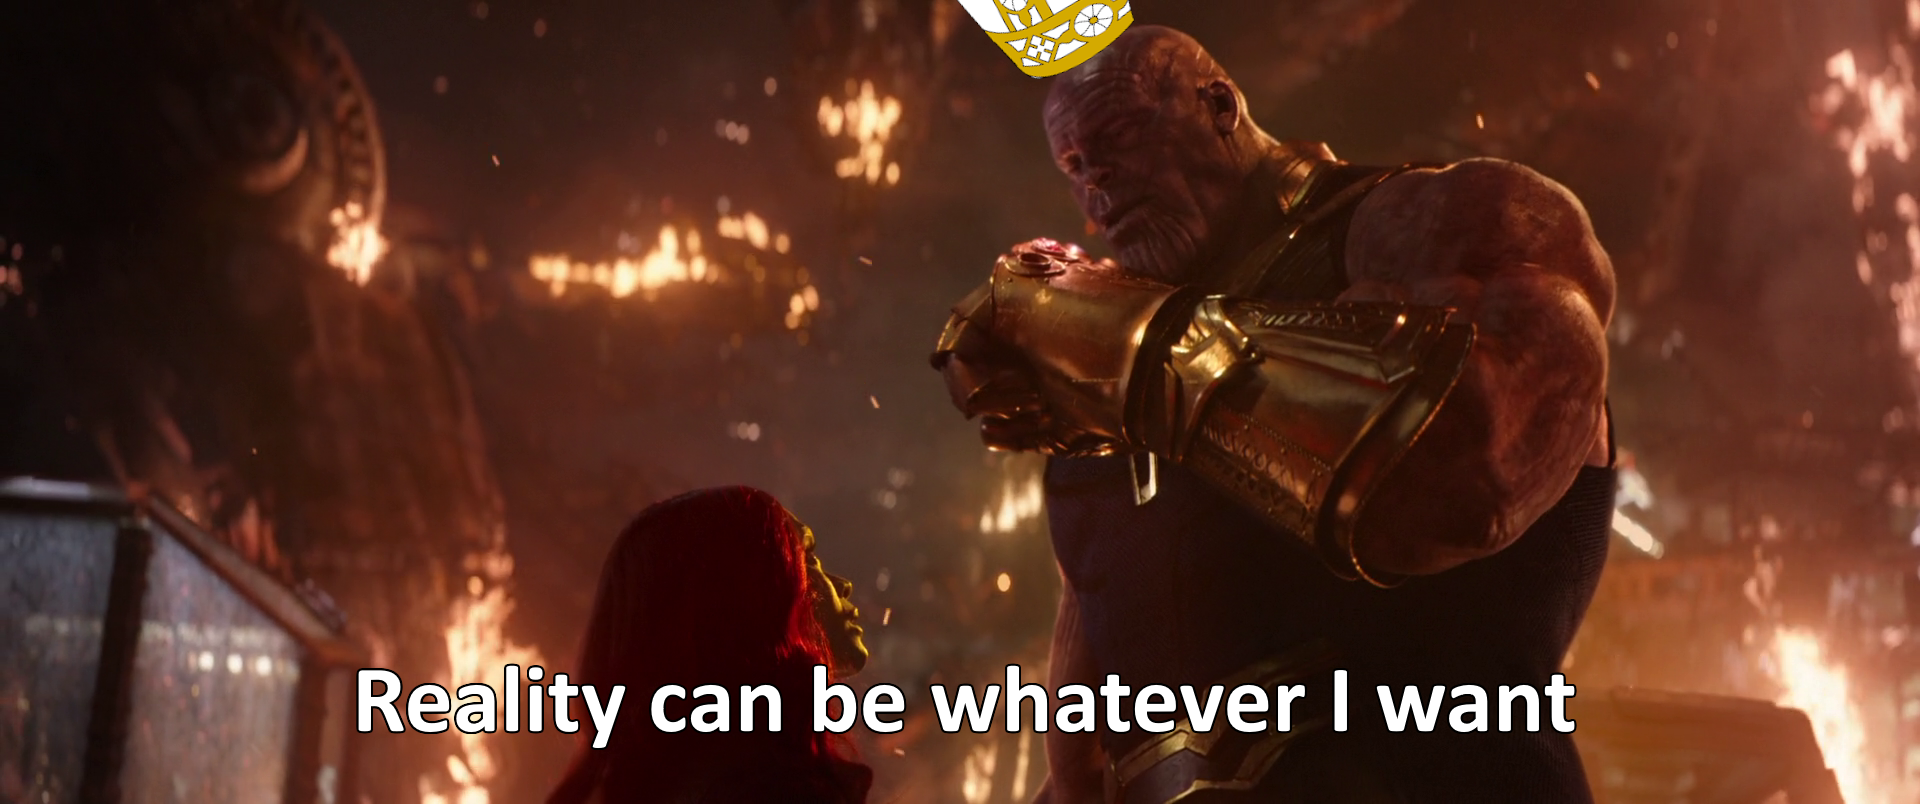 pope thanos Template - Imgflip